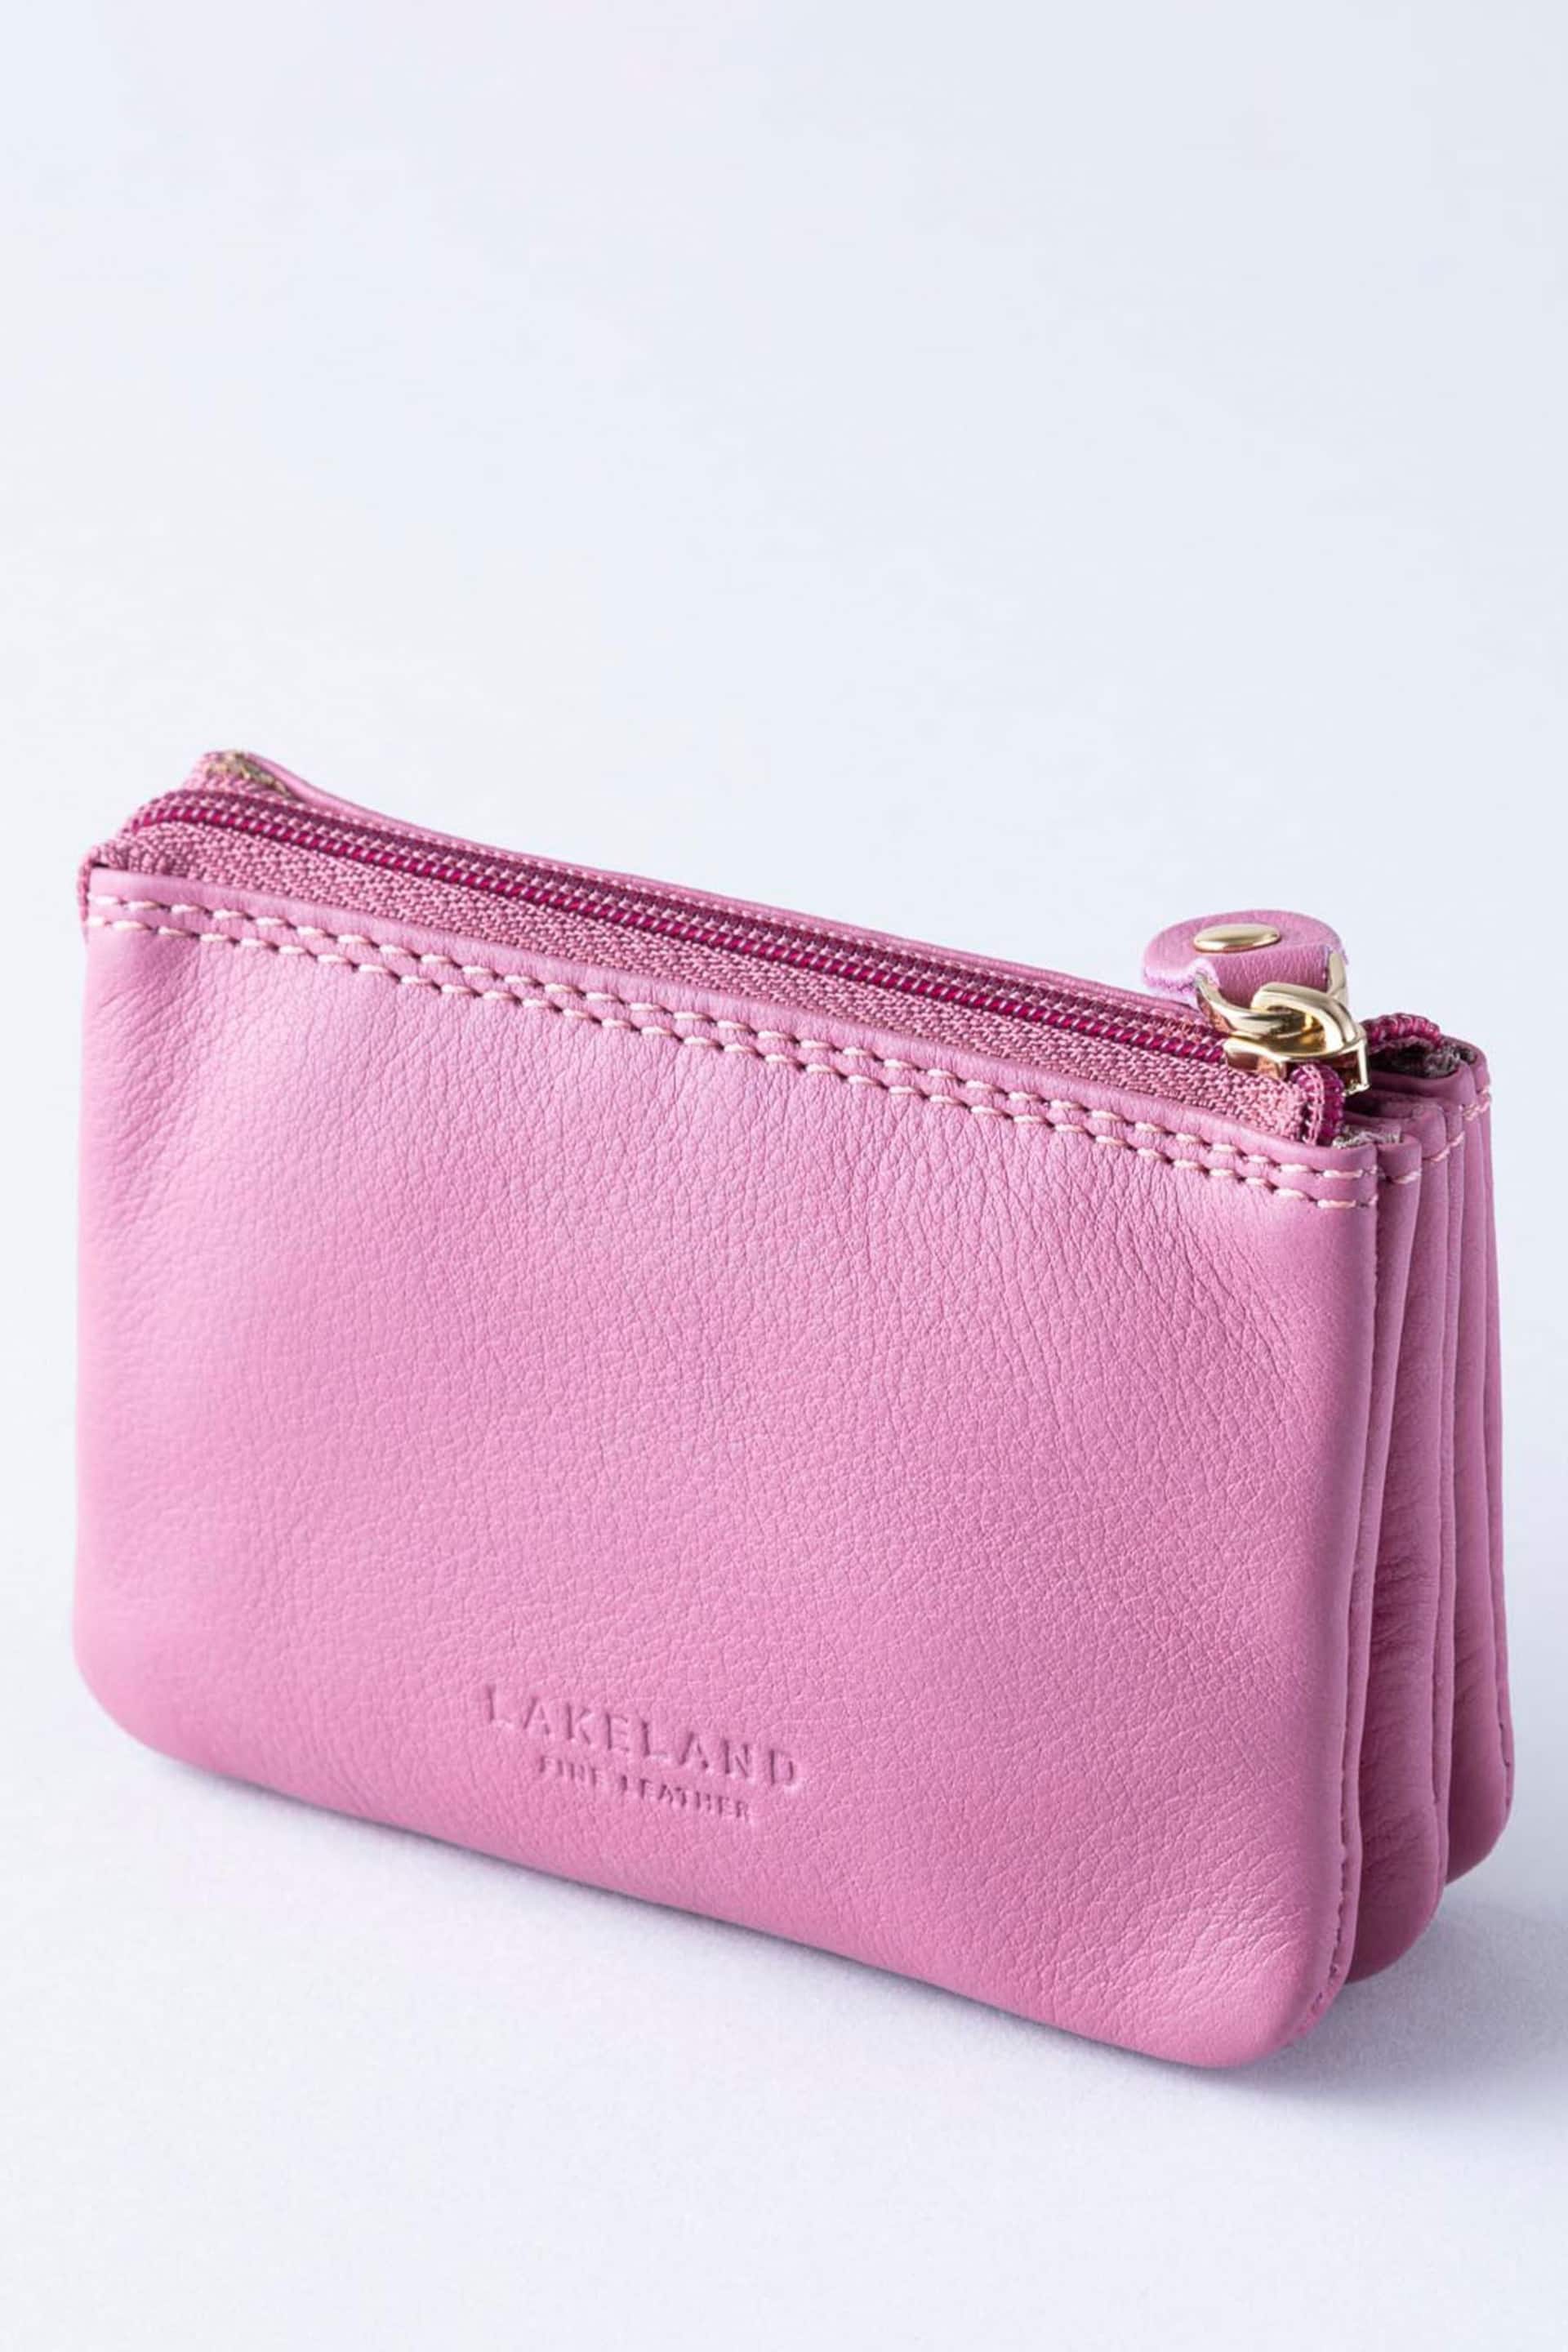 Lakeland Leather Mauve Pink Protected Leather Coin Purse - Image 2 of 4